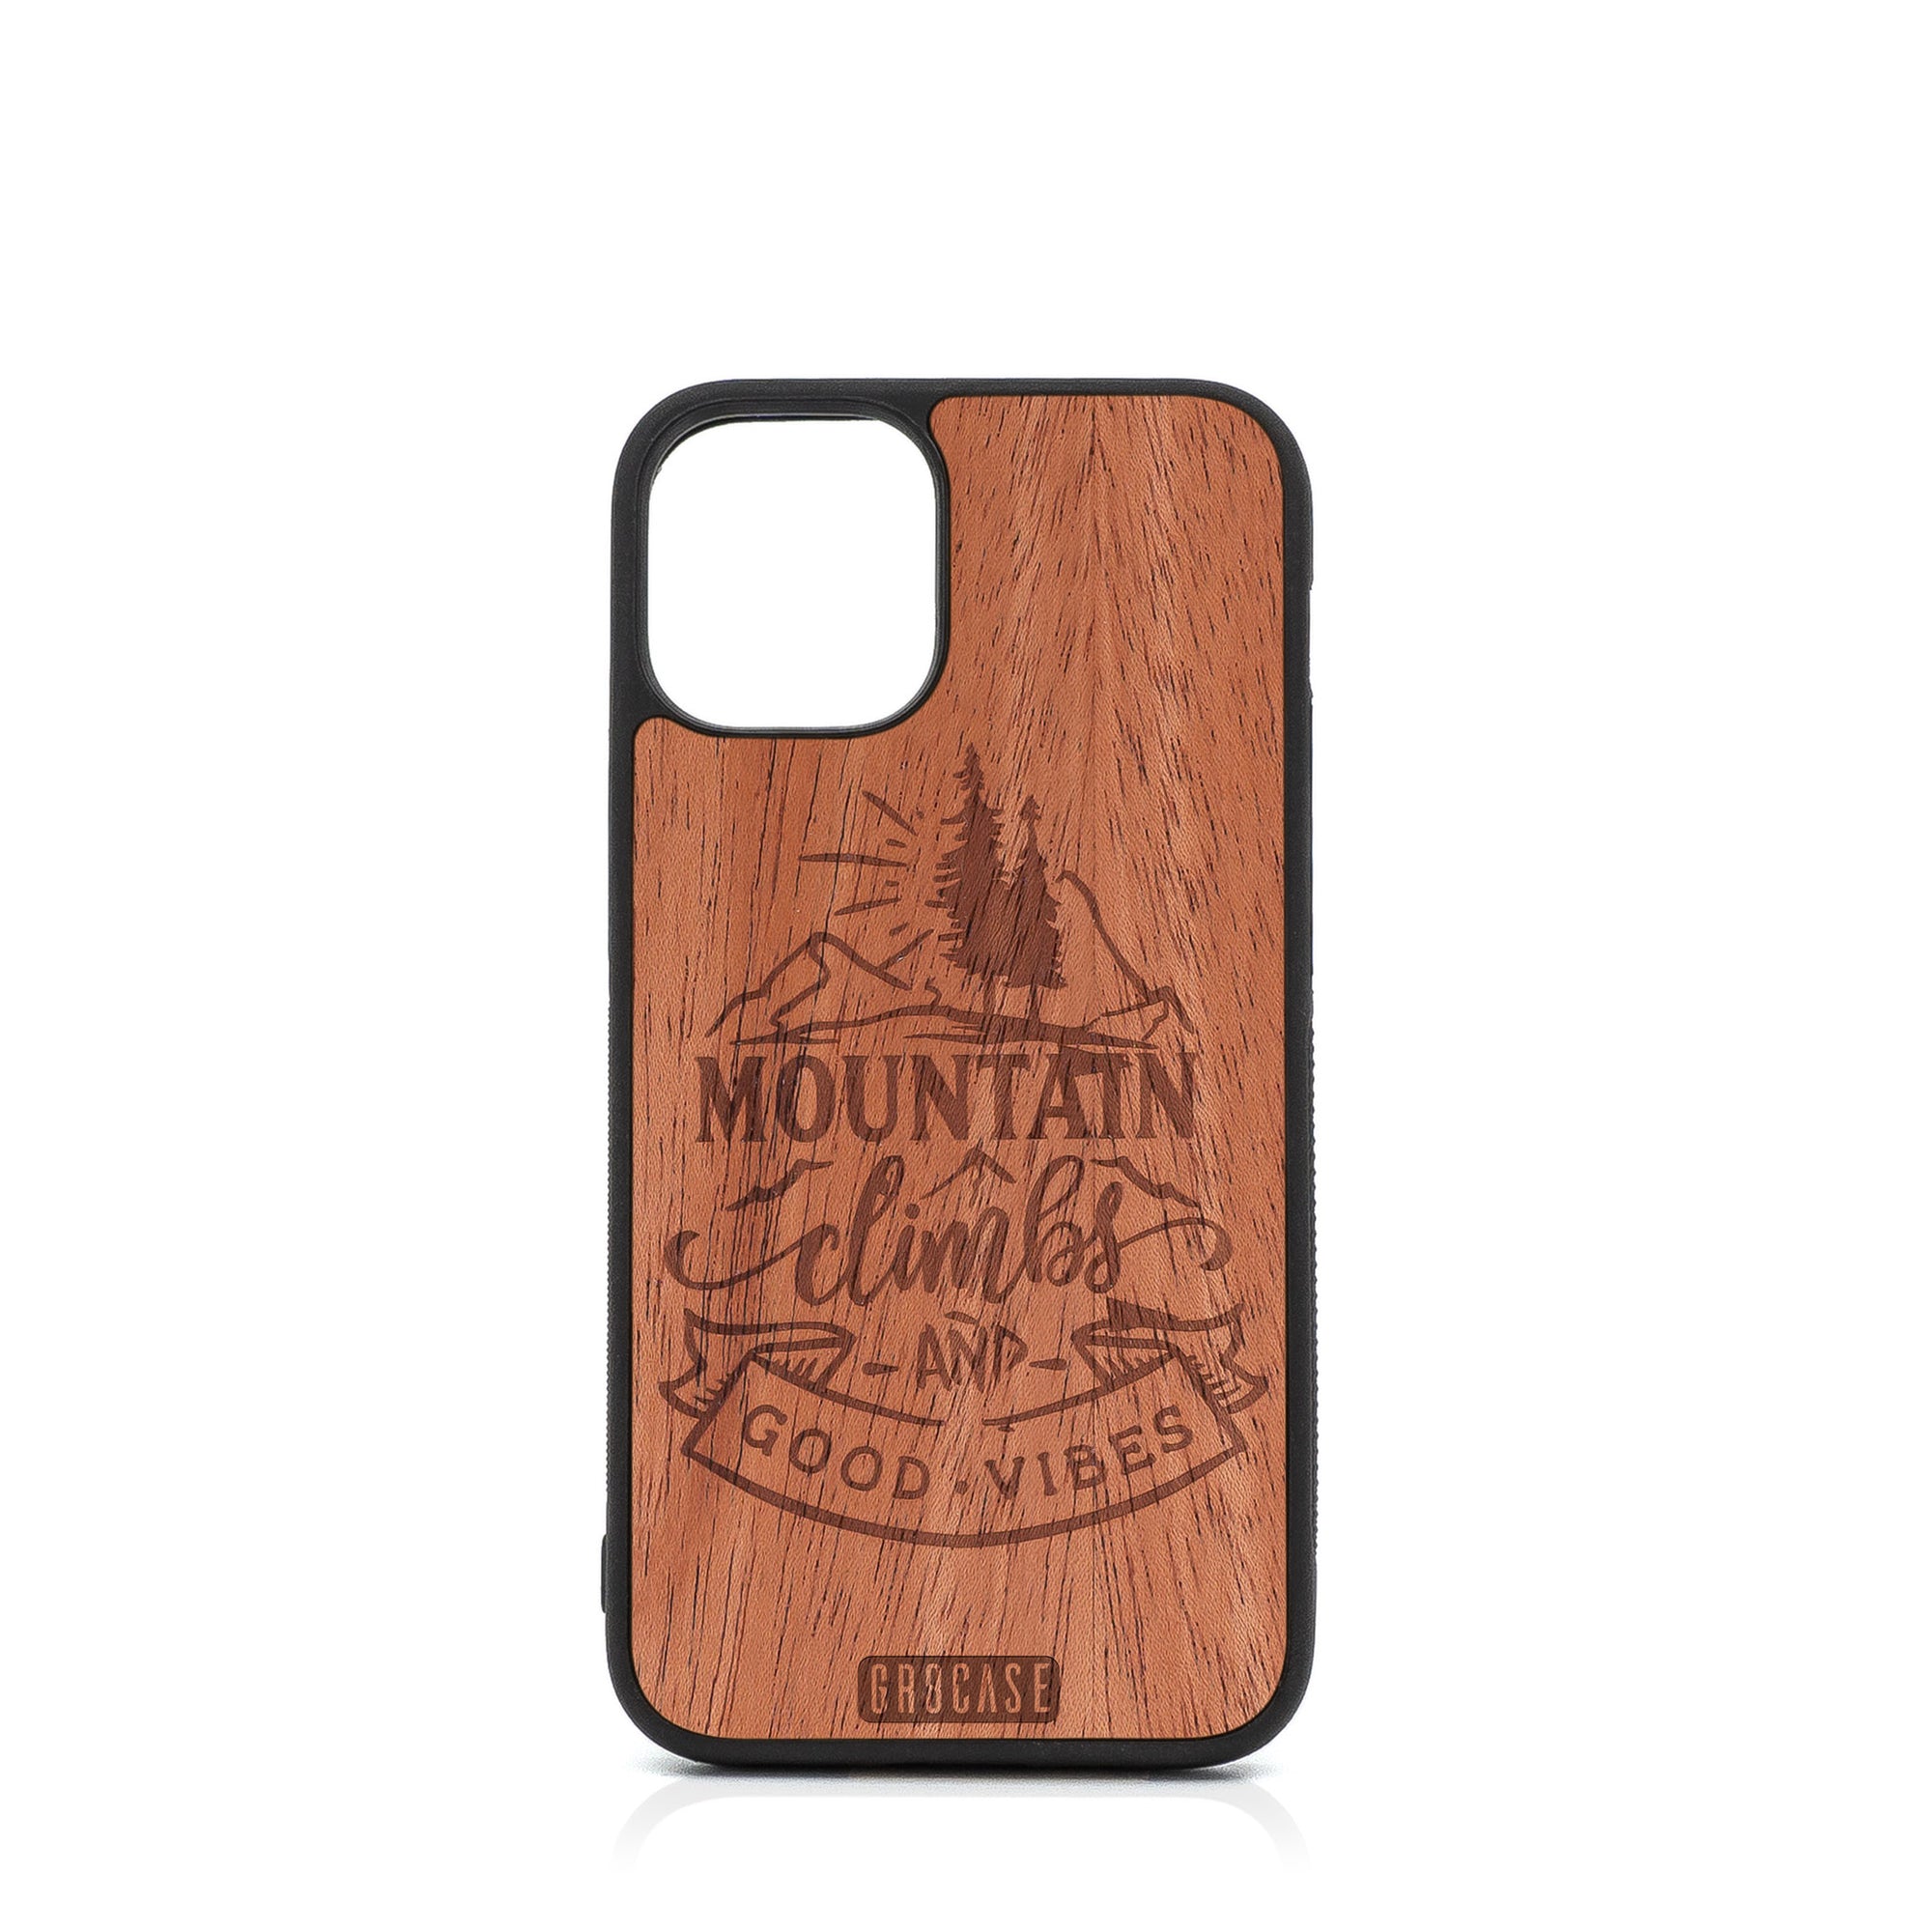 Mountain Climbs And Good Vibes Design Wood Case For iPhone 12 Mini